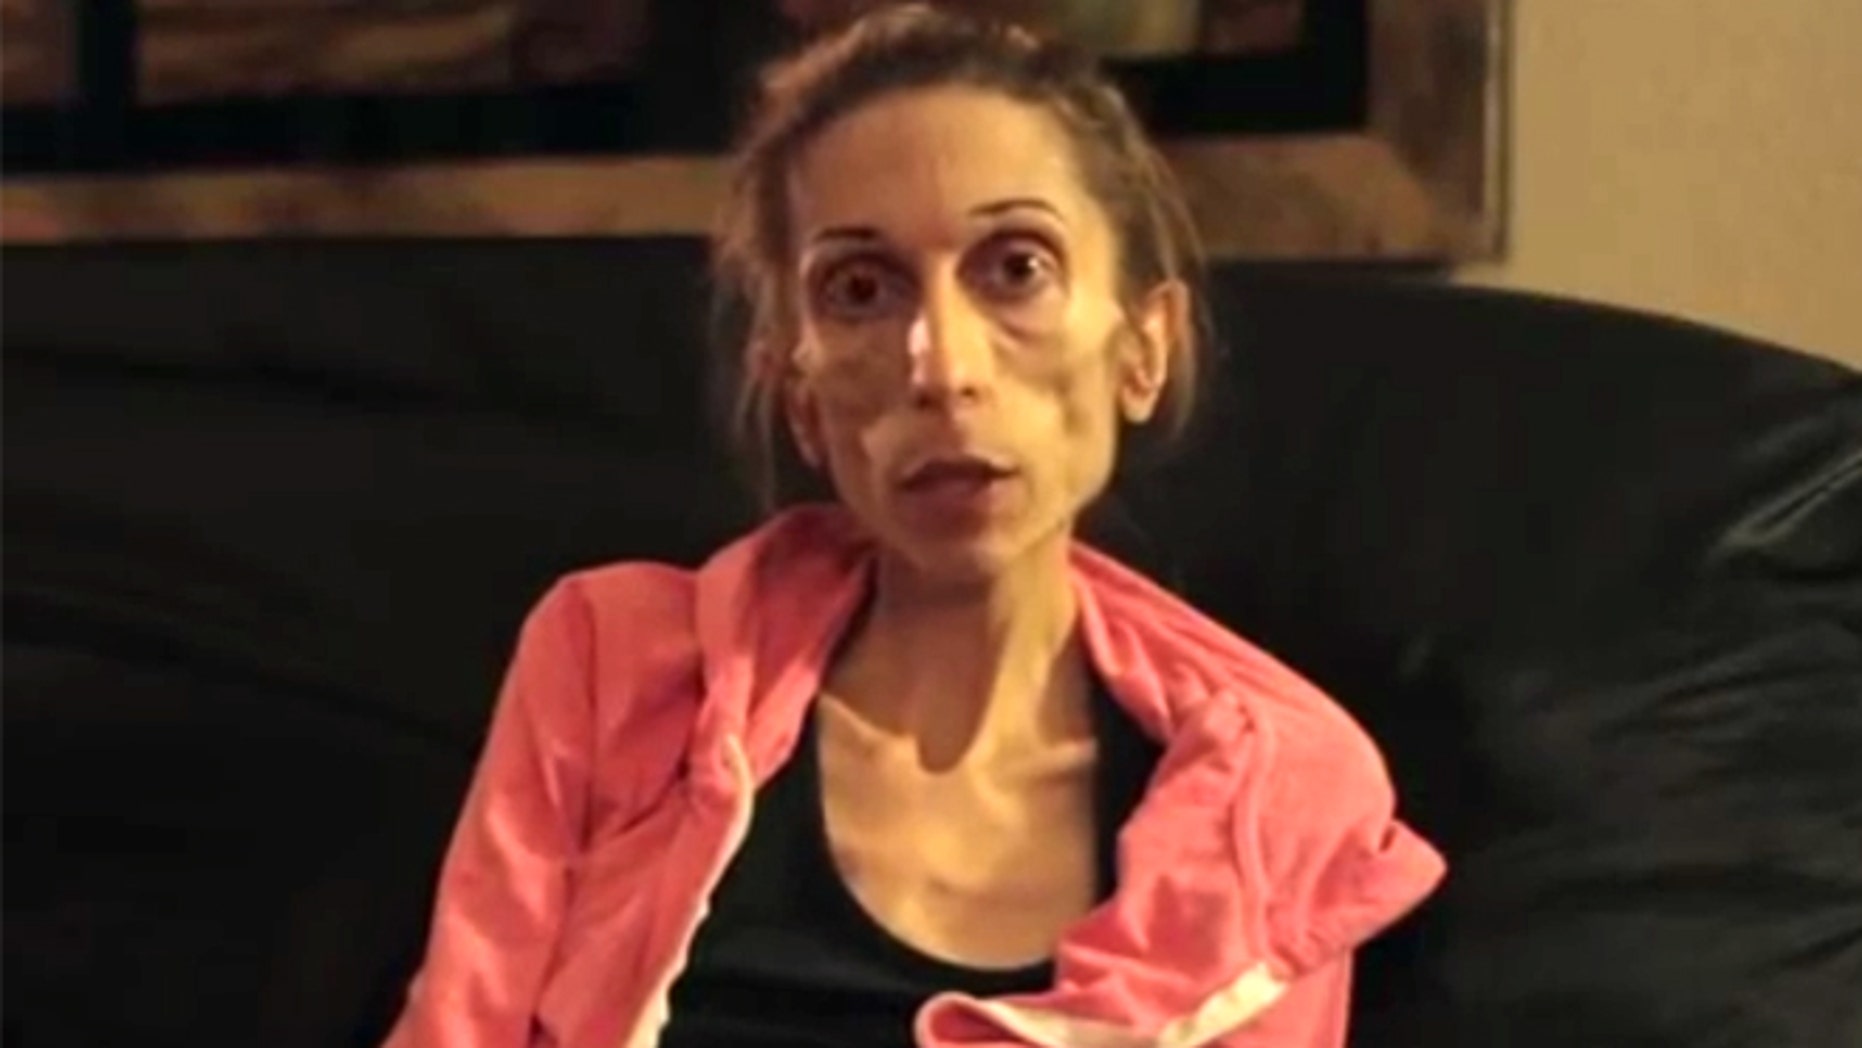 California Woman With Anorexia Makes Plea For Help On Youtube Fox News